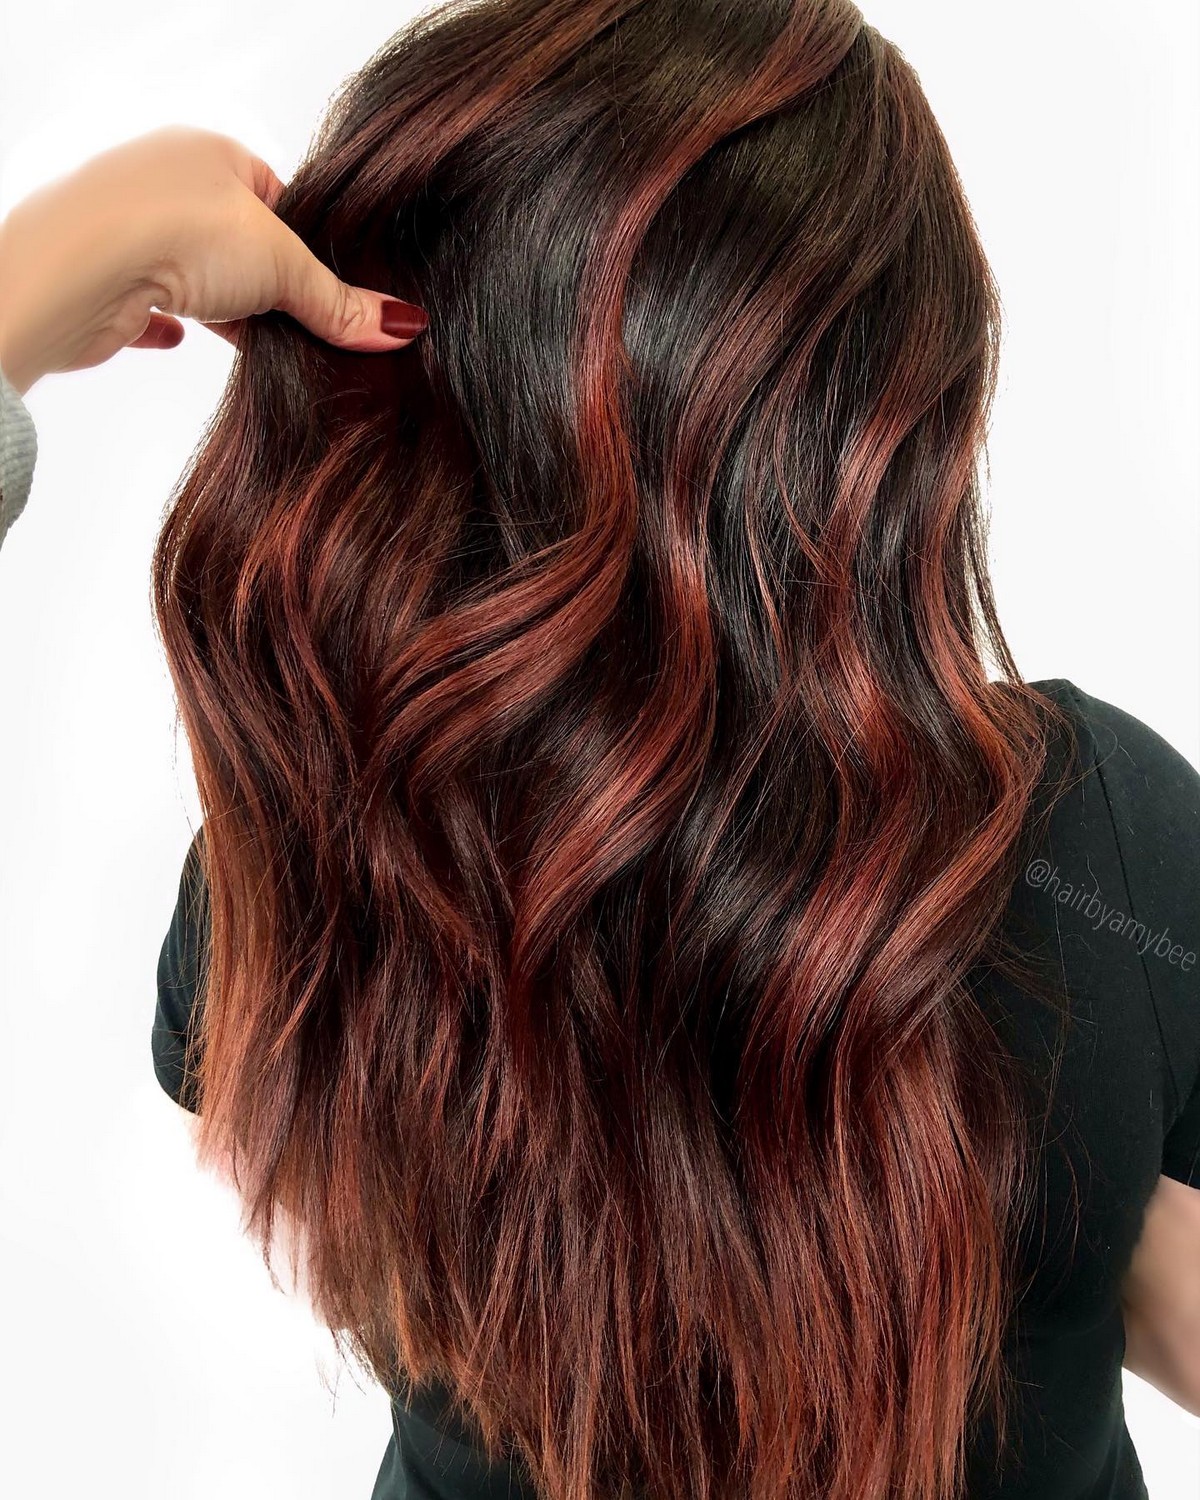 Dark Brown Hair With Red Highlights